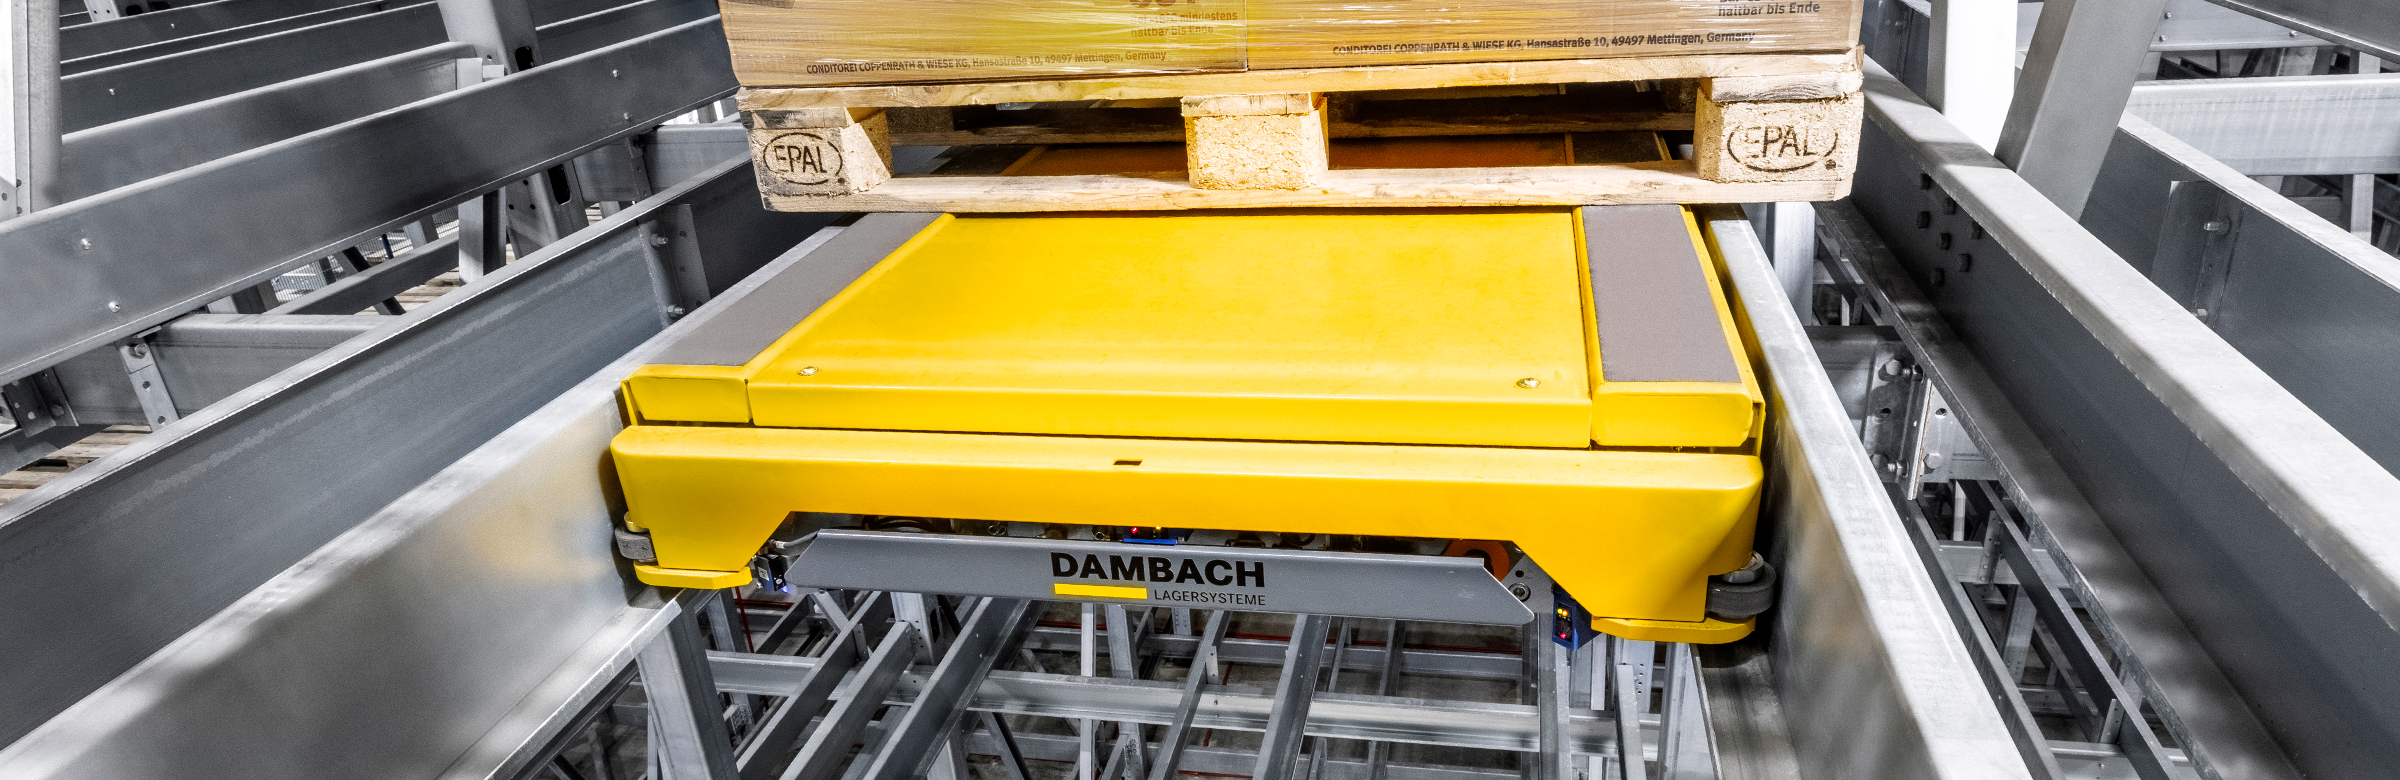 COMPACT SHUTTLE DAMBACH Lagersysteme